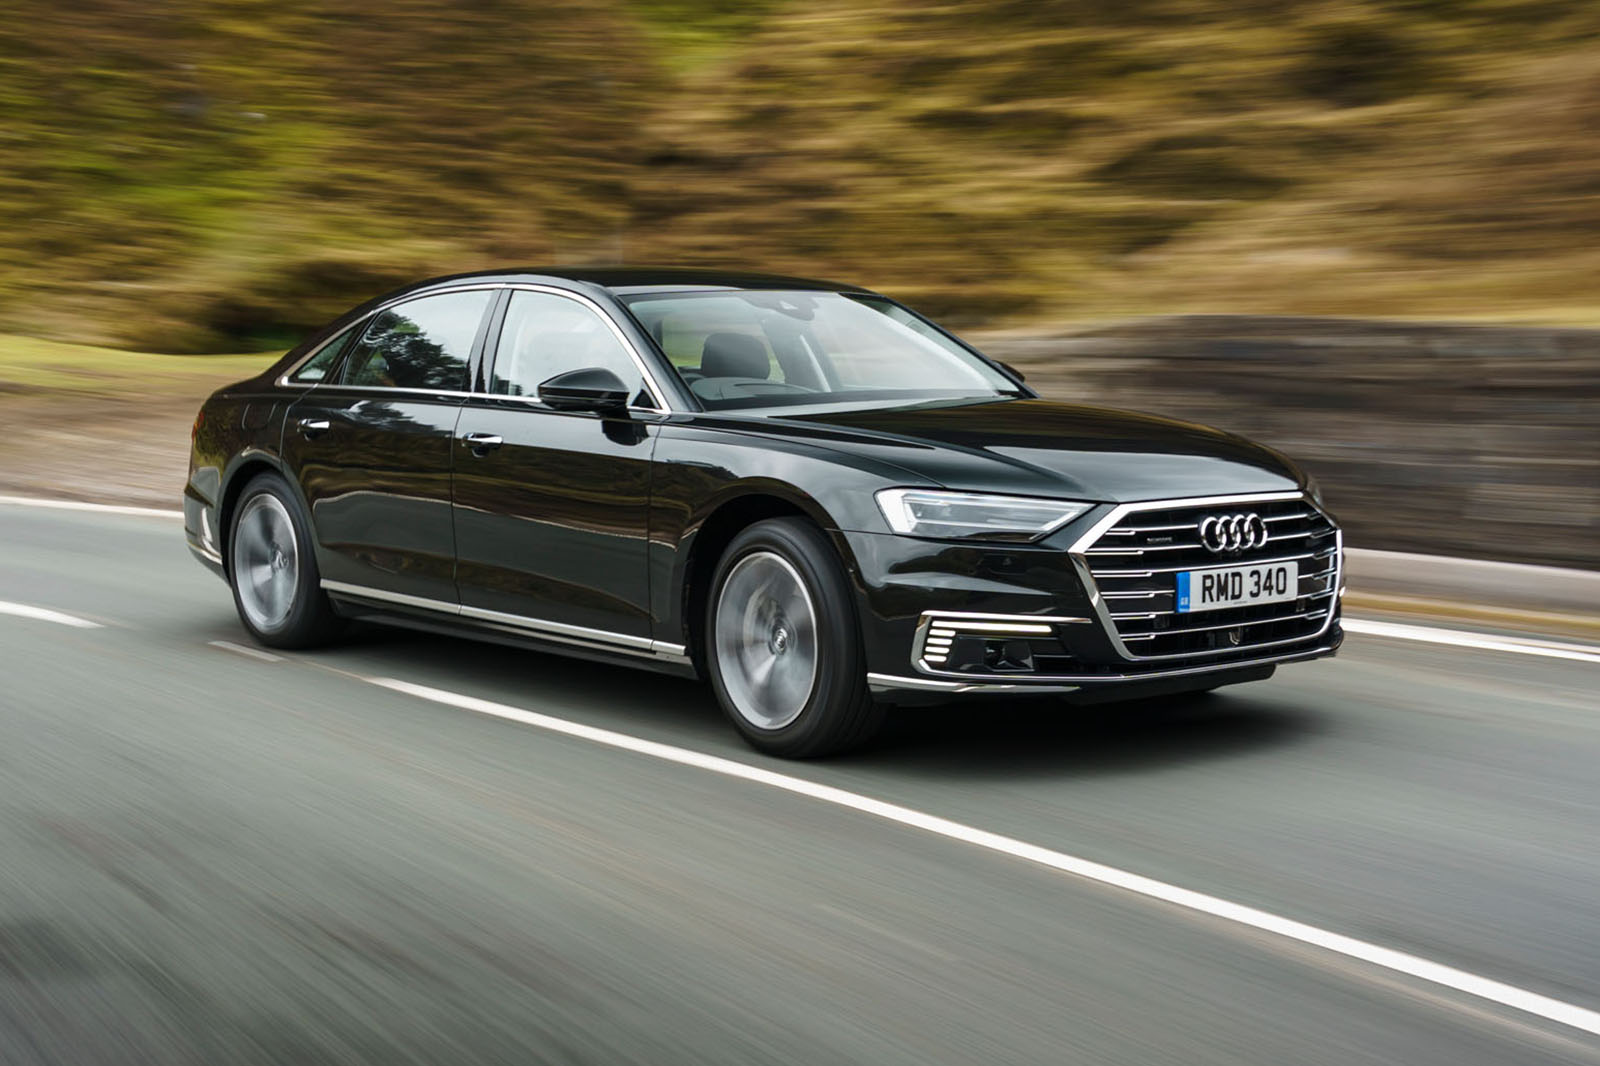 Audi A8 For Hire In UAE 